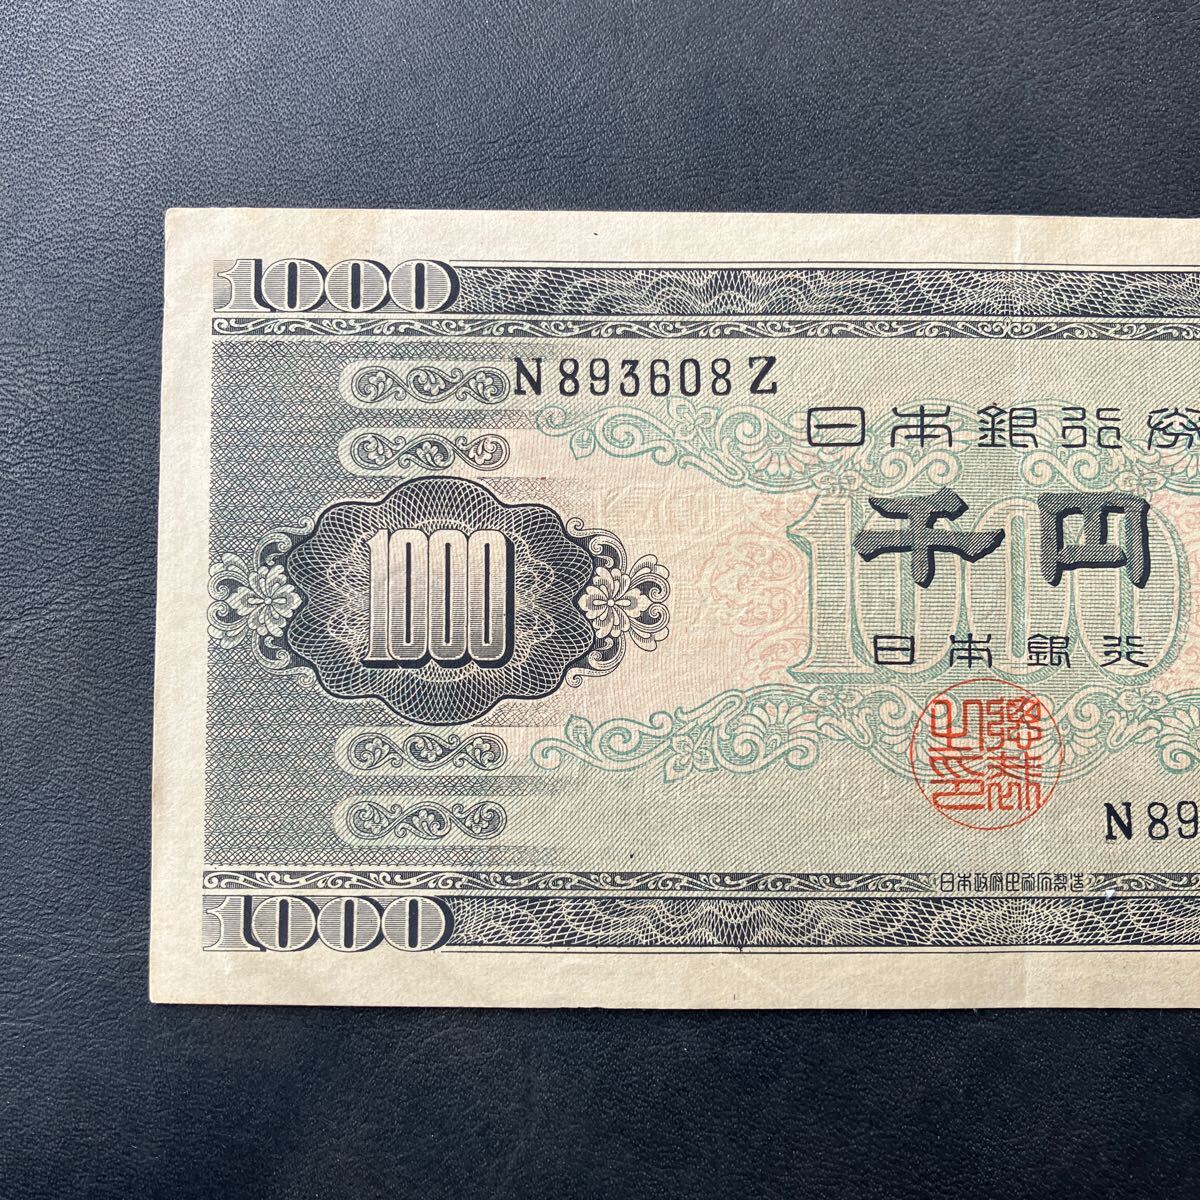  thousand jpy .. virtue futoshi . Japan Bank B number ticket old note 1,000 jpy . alphabet one column beautiful goods *17